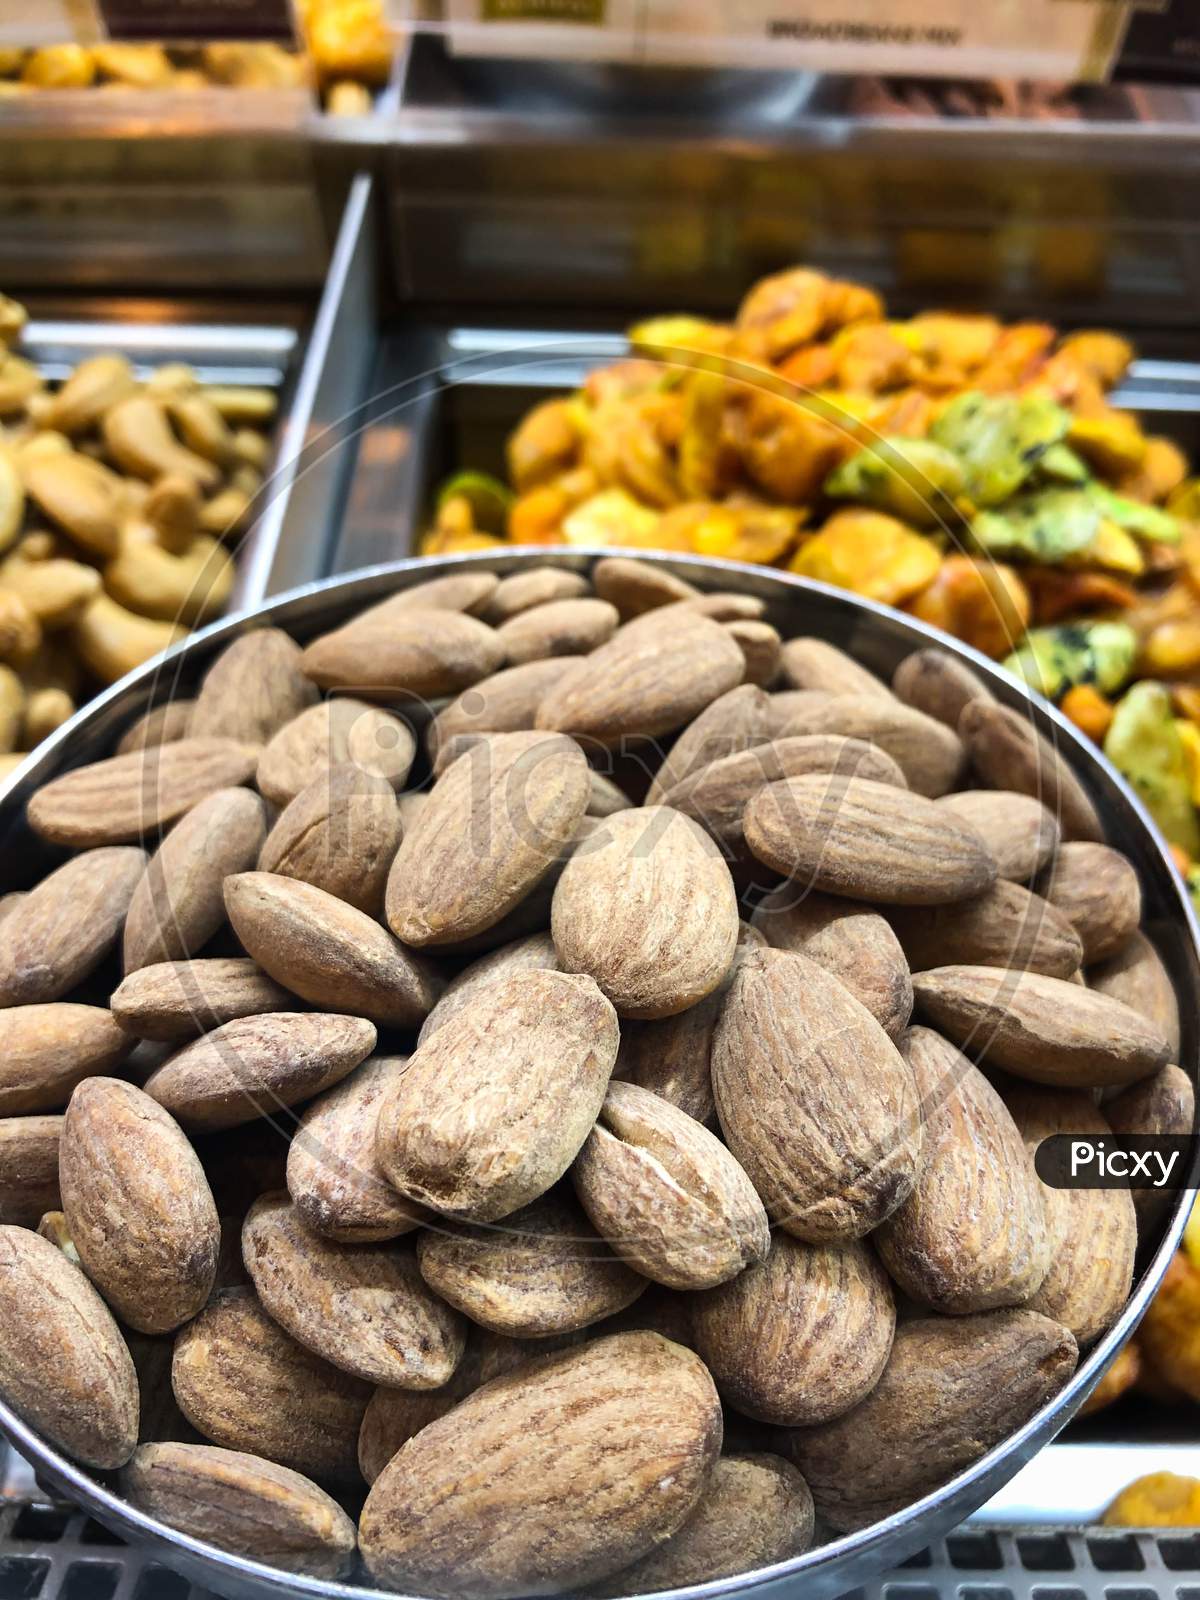 Dry Almonds Mixed With Salt And Peper Masala, Spicy Almond, Slaty